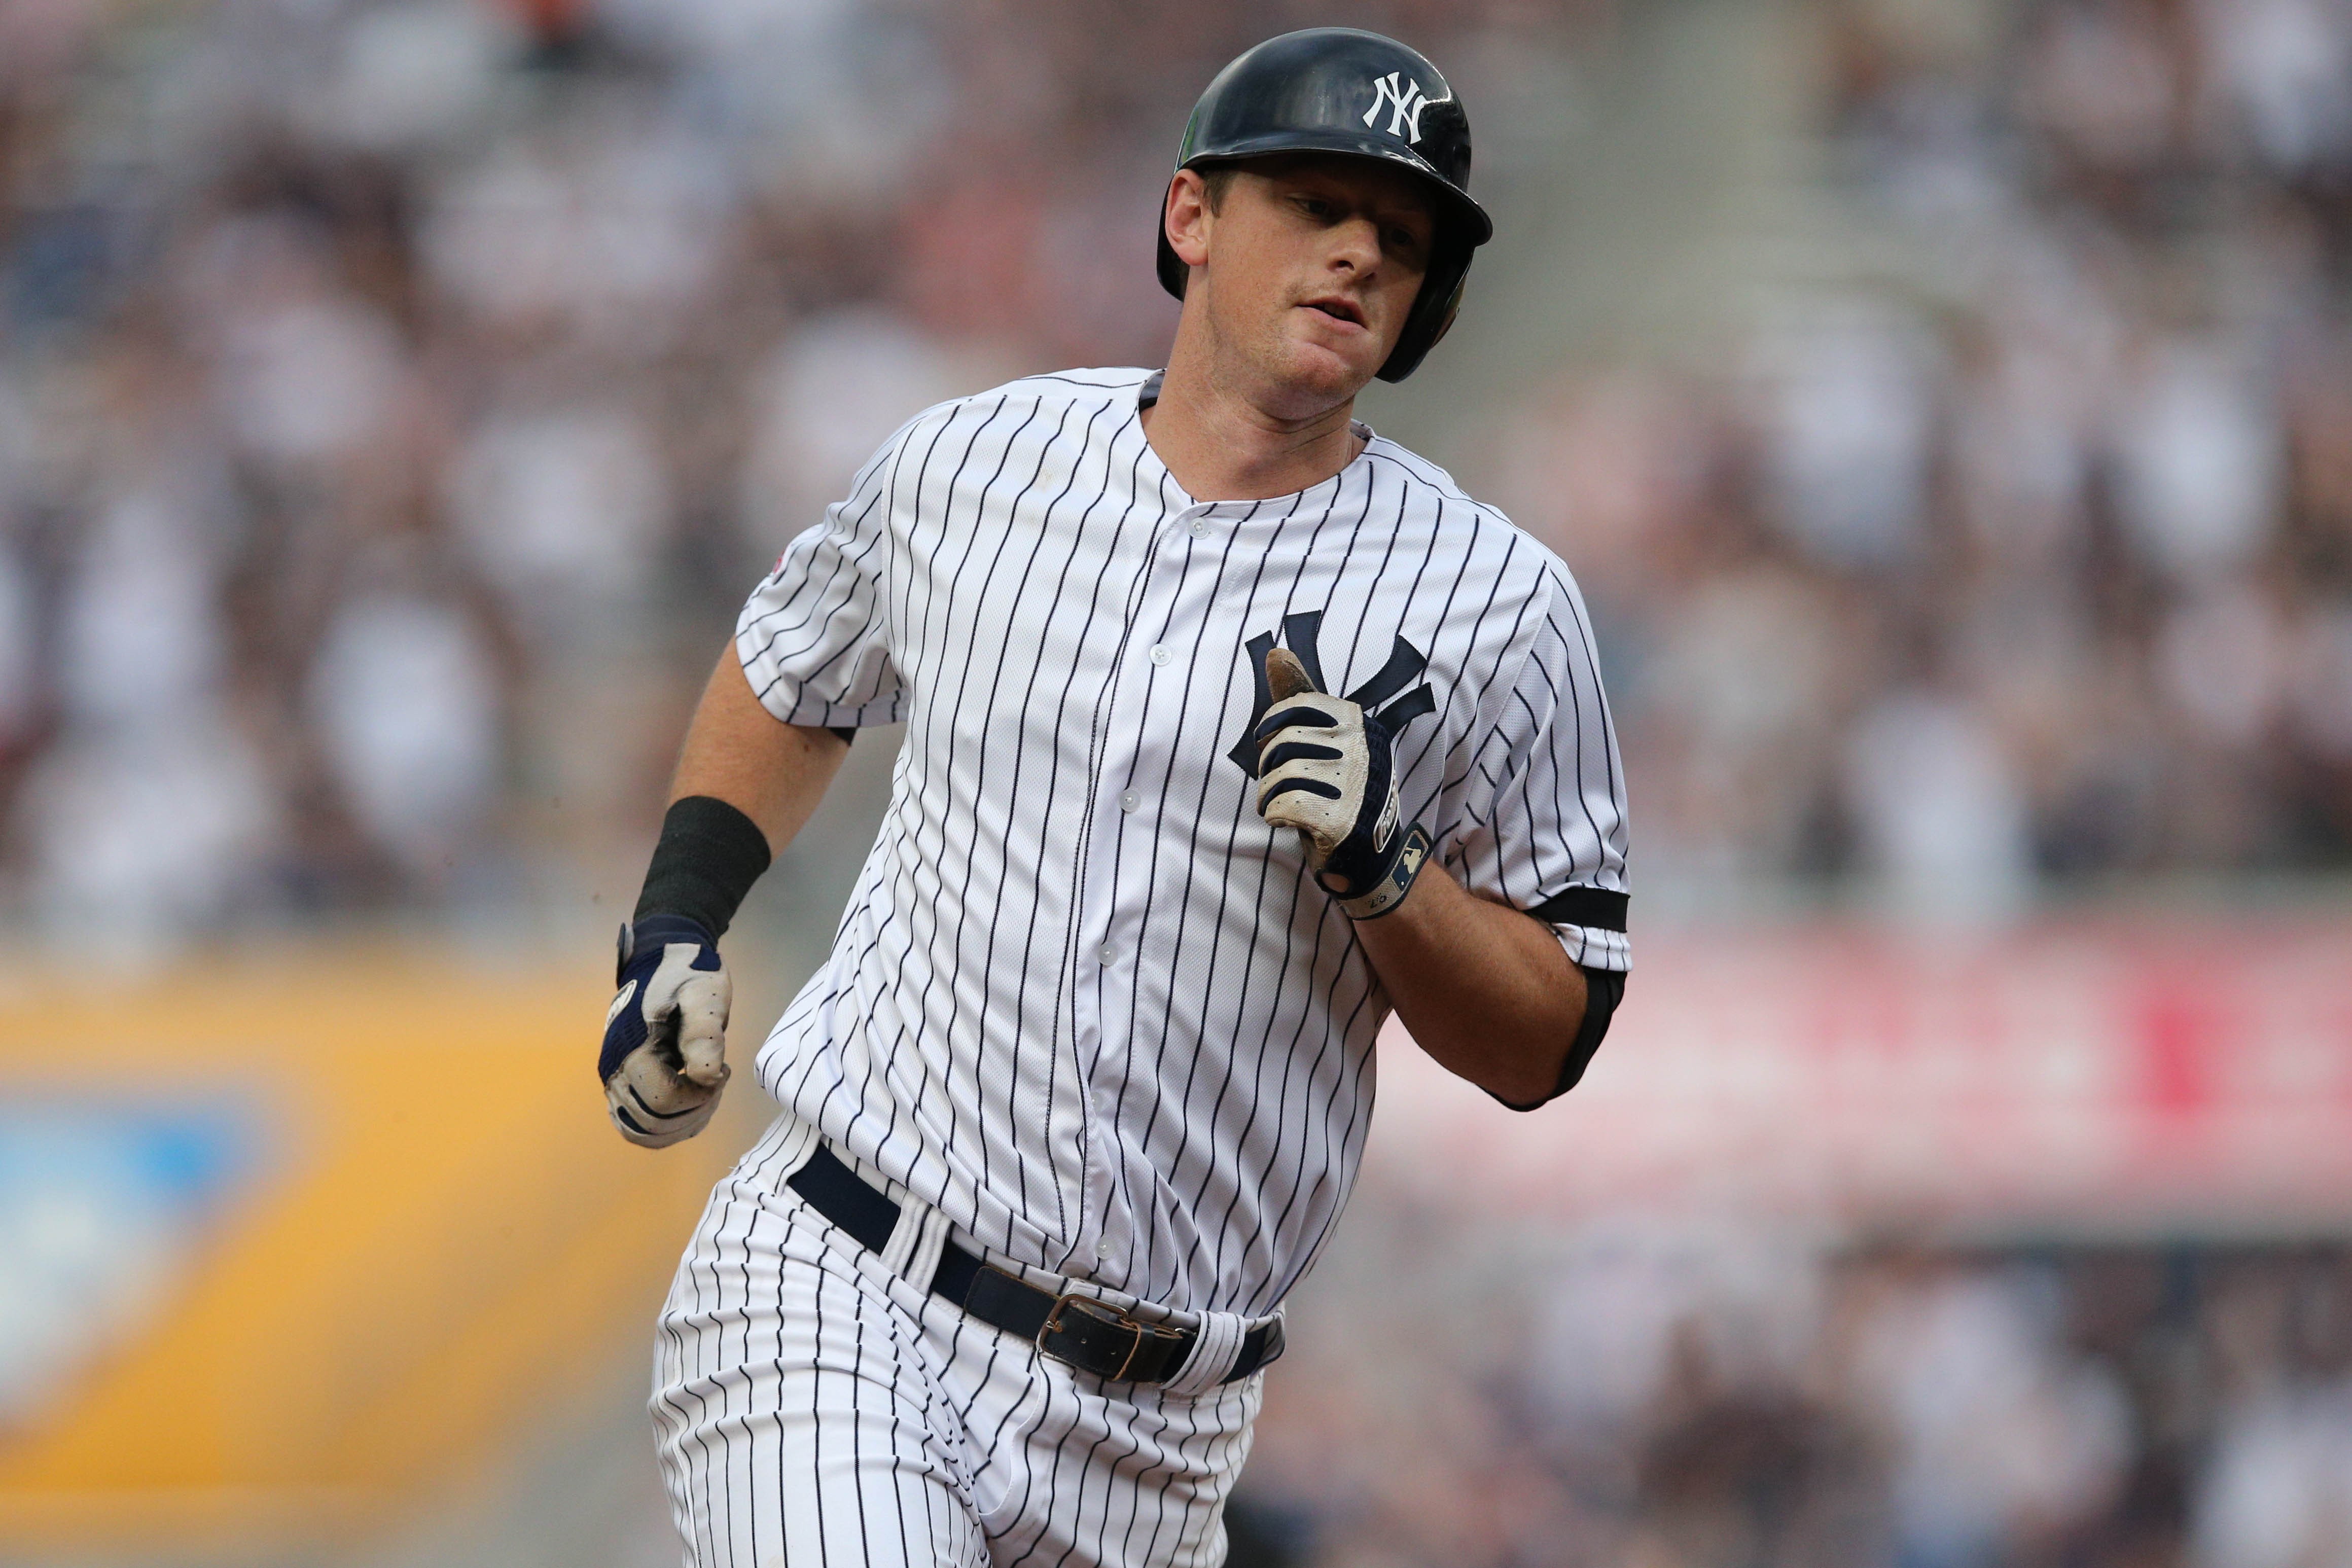 New York Yankees Yankee players may be free agents already?